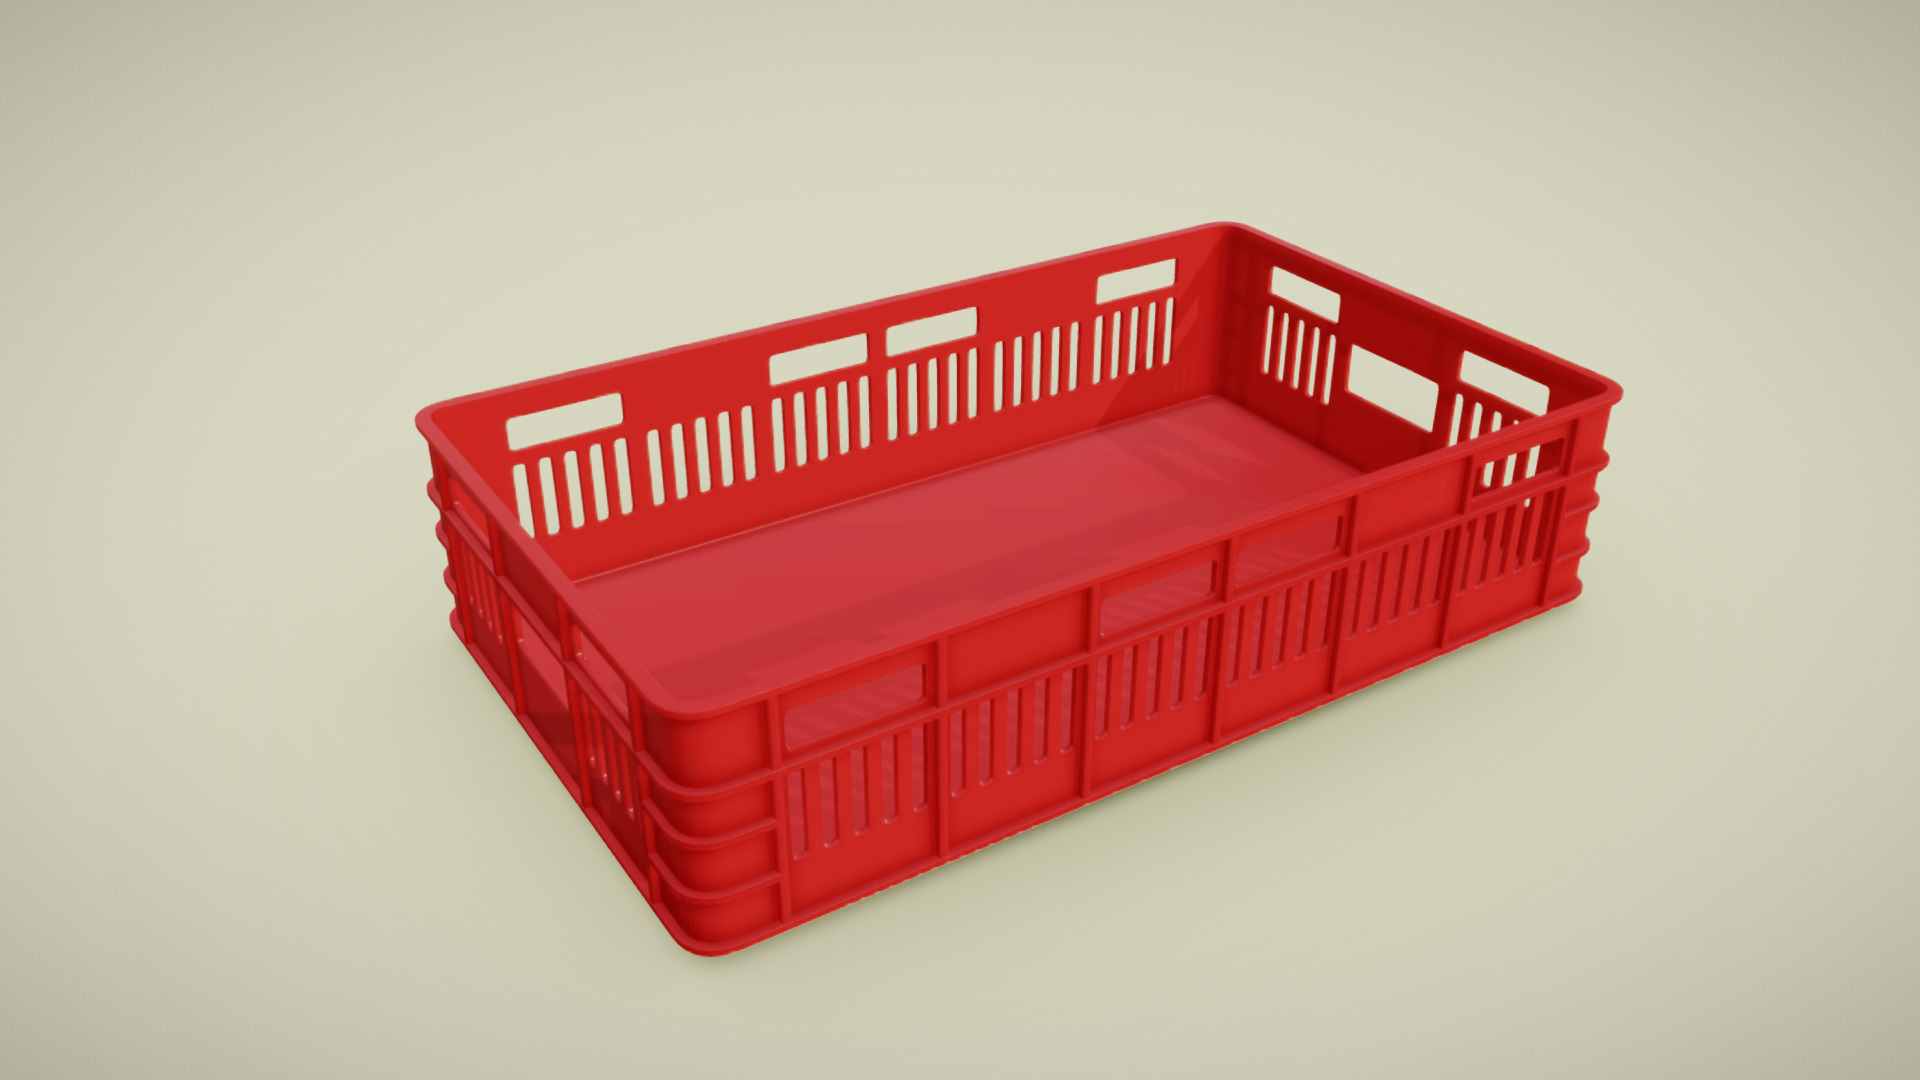 3D model Plastic Food Storage Box - This is a 3D model of the Plastic Food Storage Box. The 3D model is about a red box with white text.